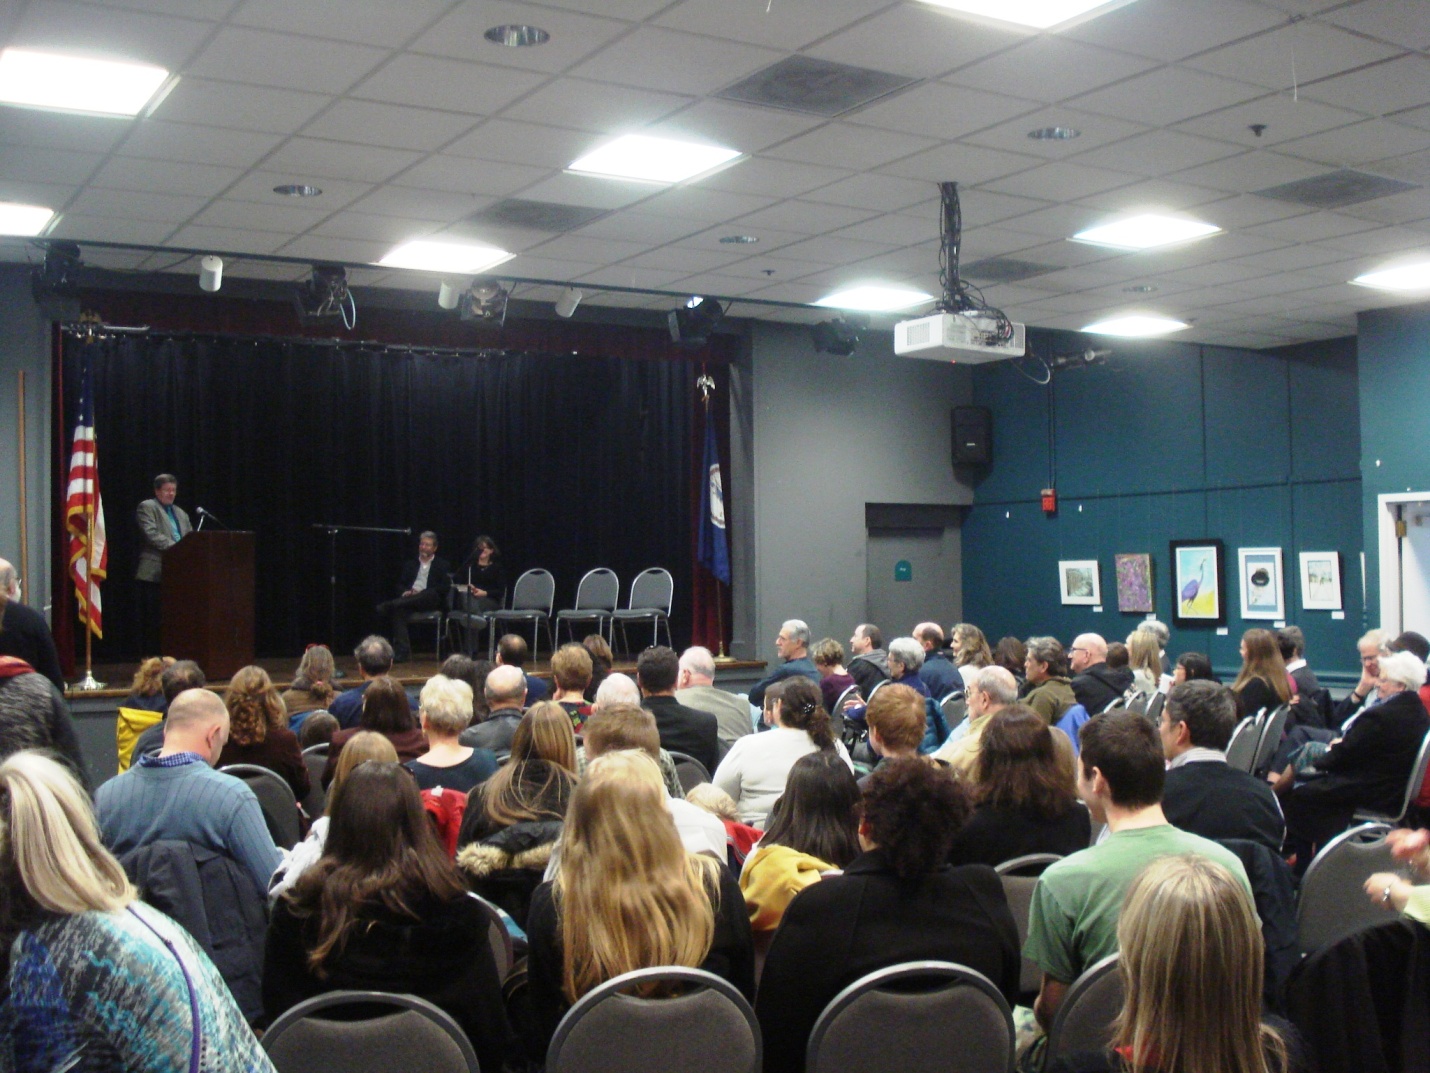 Over 150 people attended a co-sponsored event celebrating religious liberty in Fredericksburg, VA.